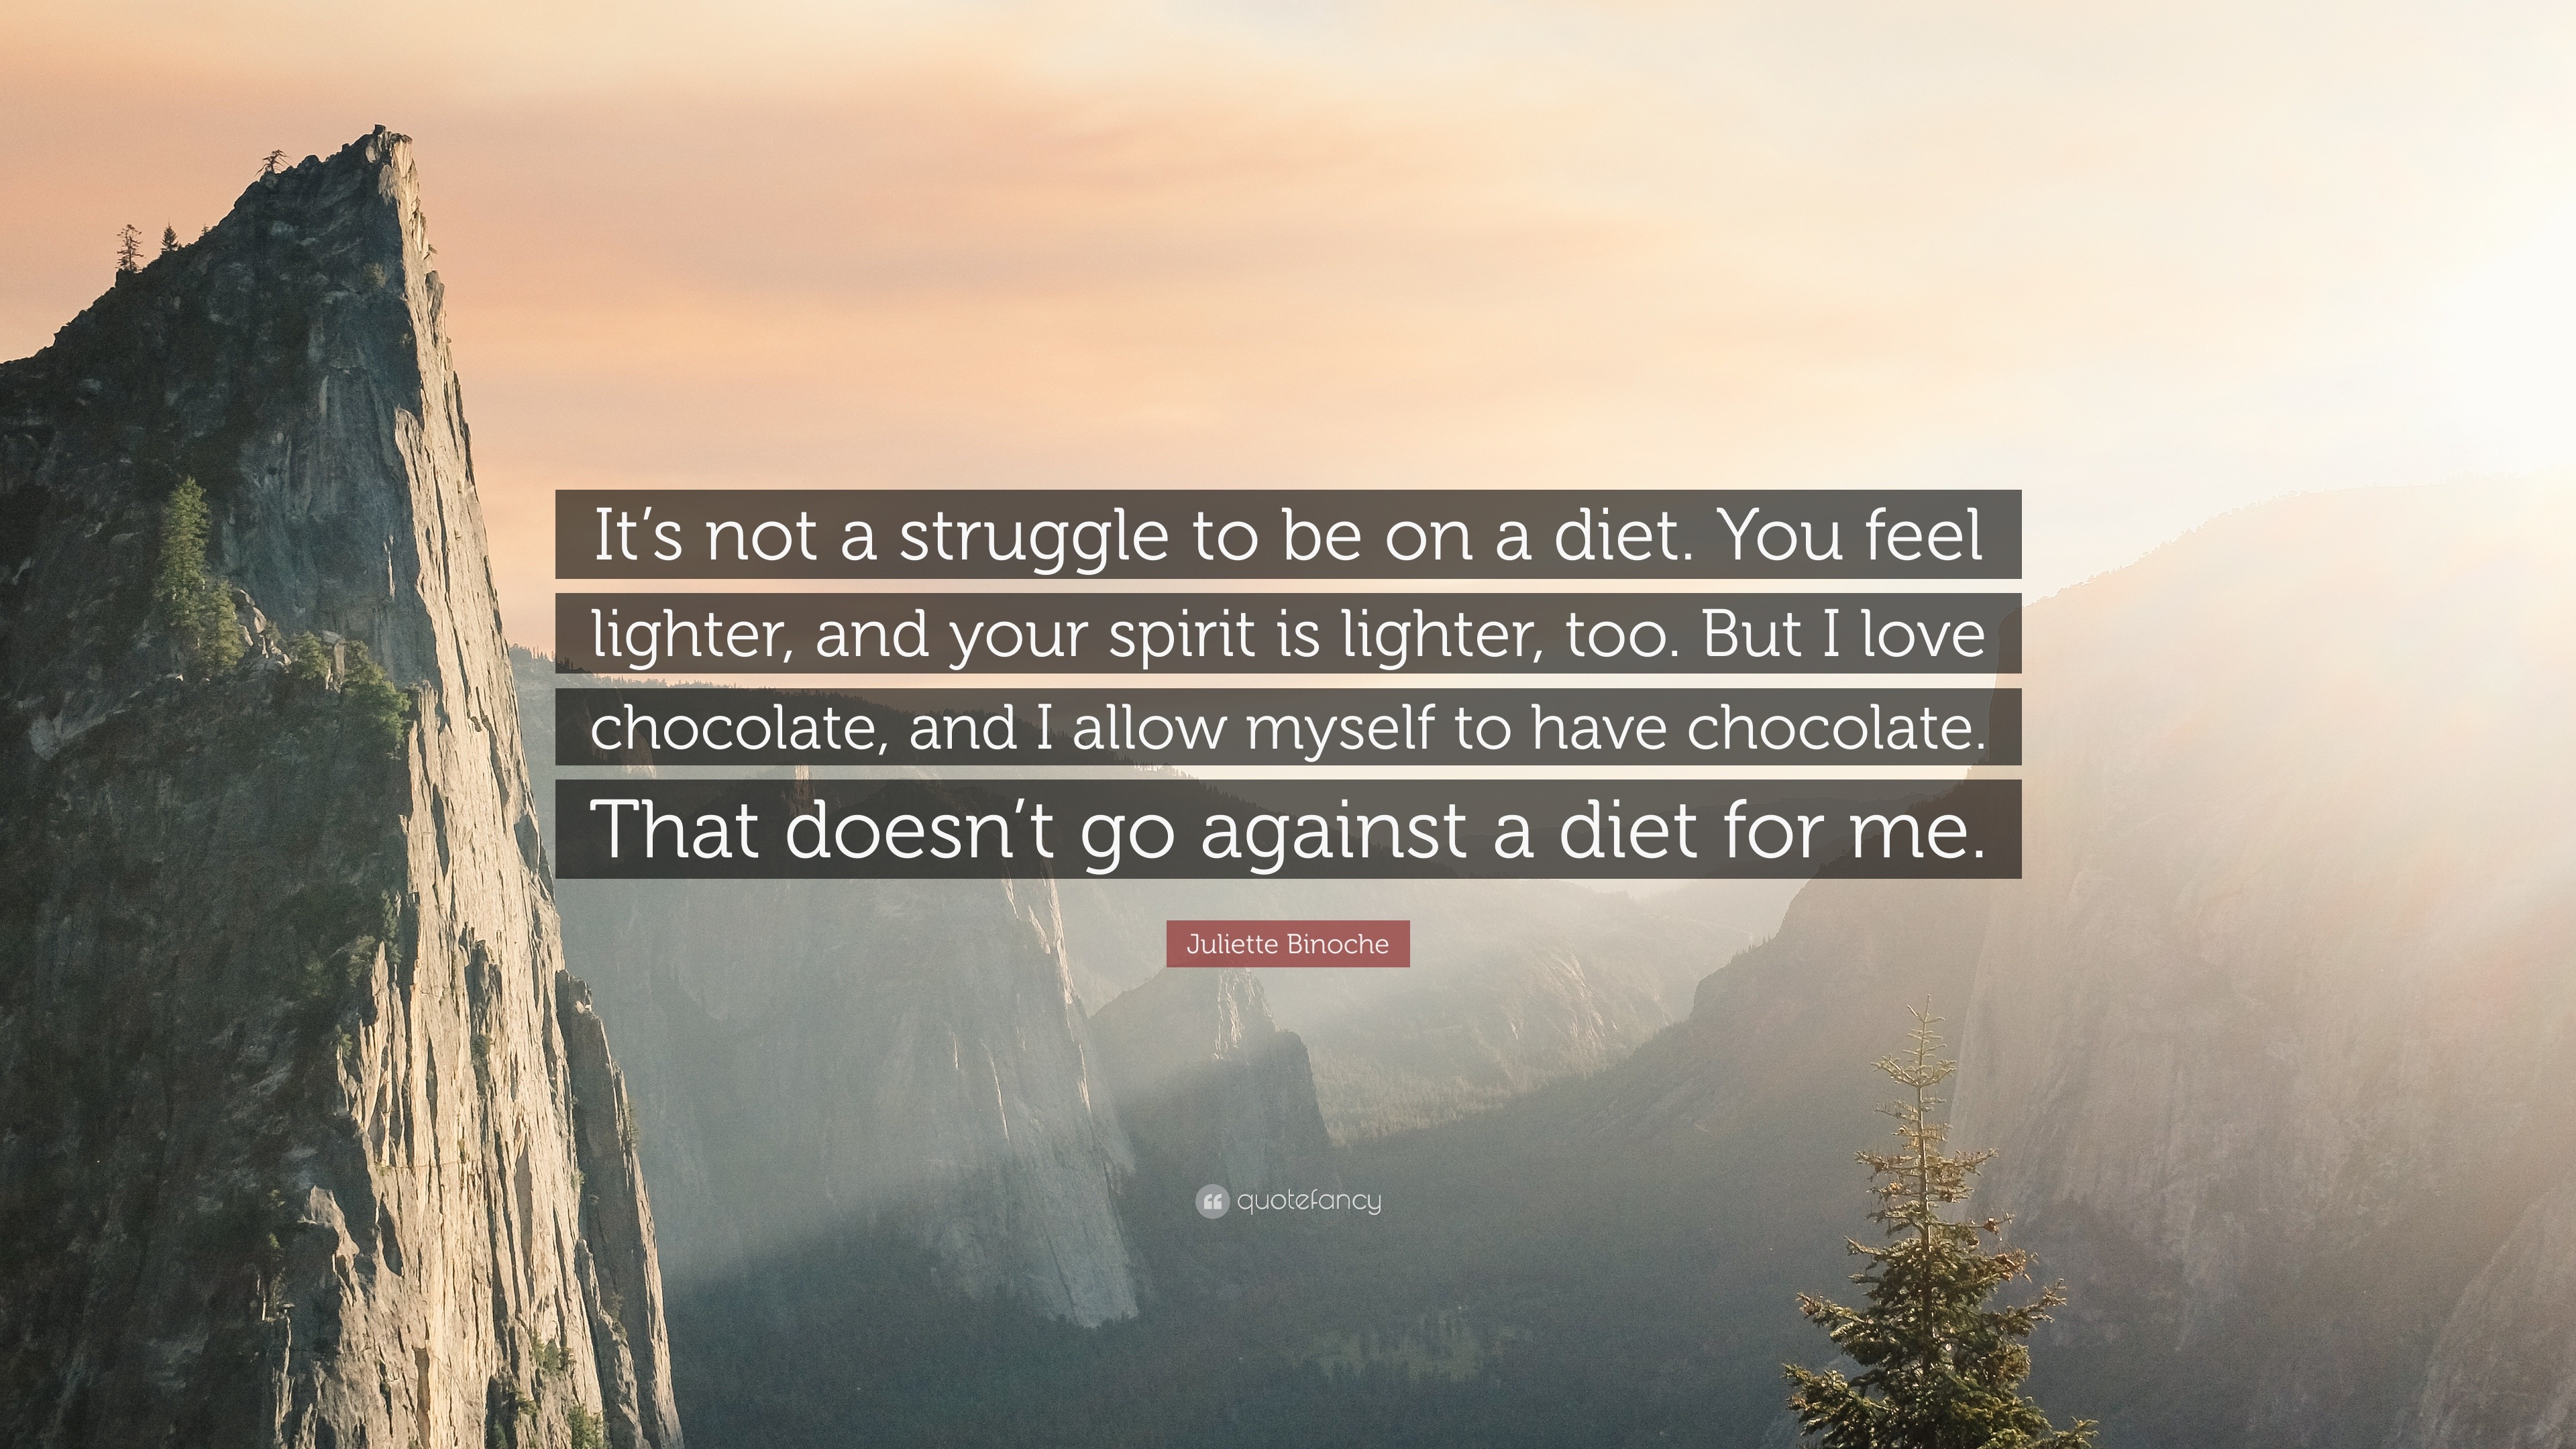 Juliette Binoche quote: It's not a struggle to be on a diet. You